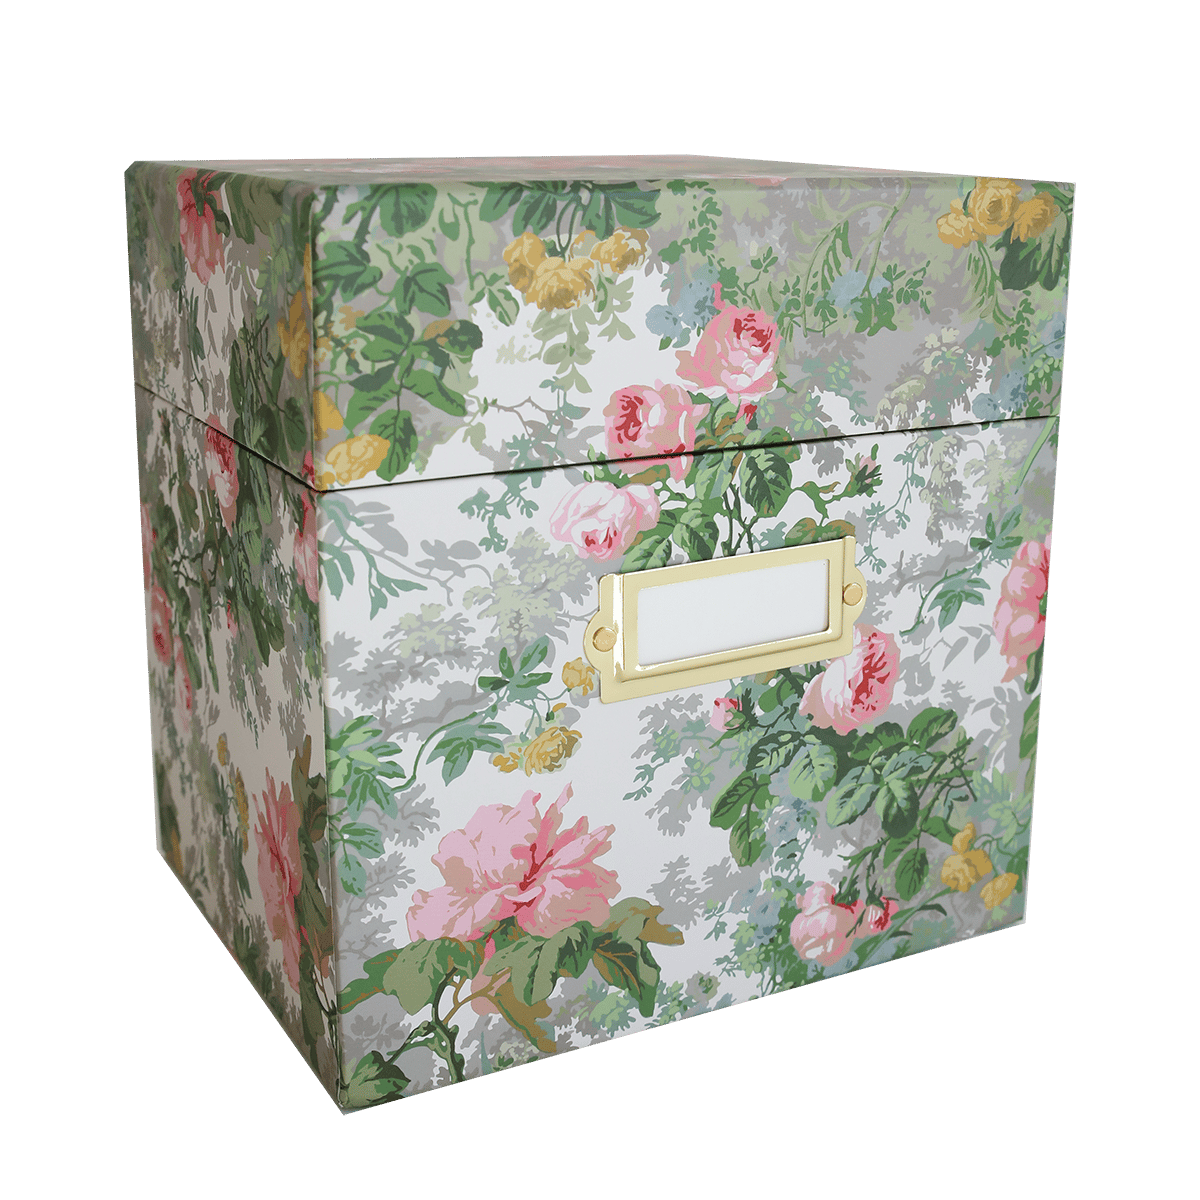 a floral box with a gold handle on a green background.